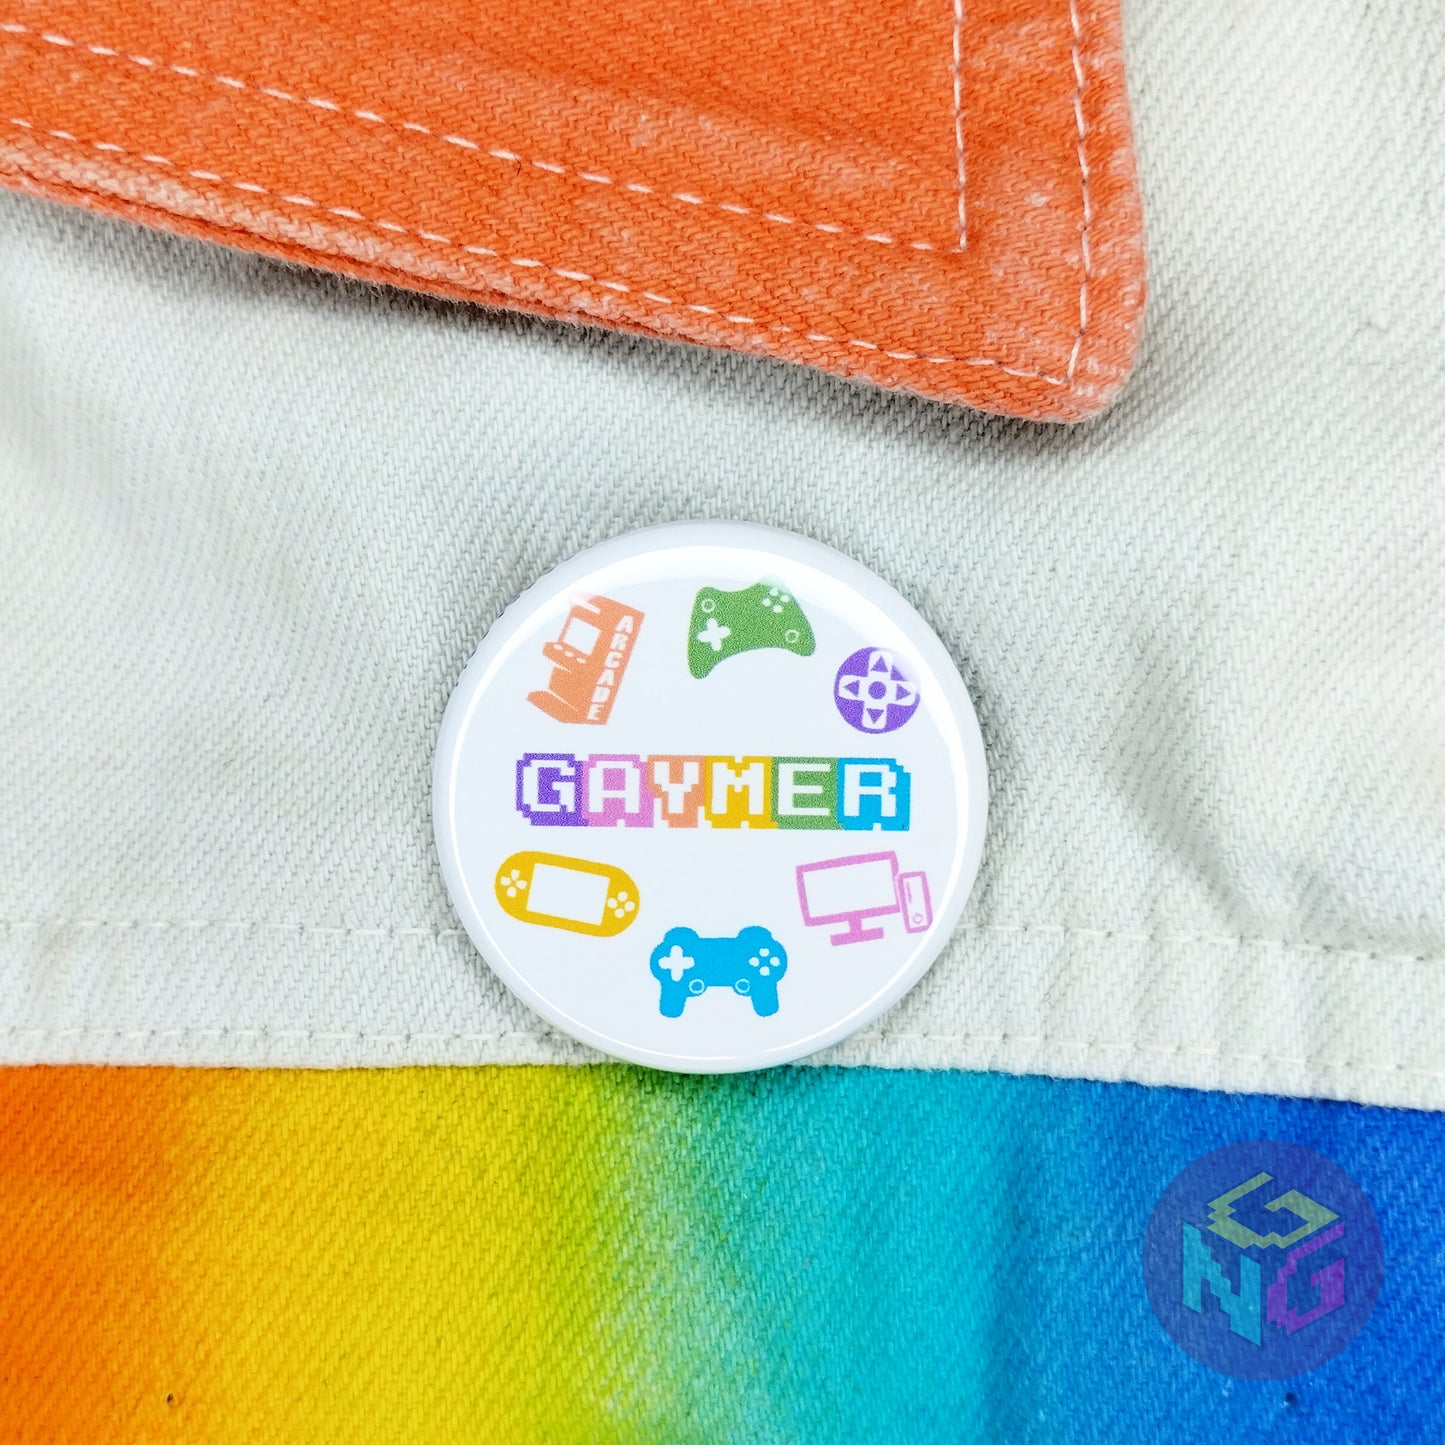 round white gaymer pin on background of white denim jacket with rainbow accents